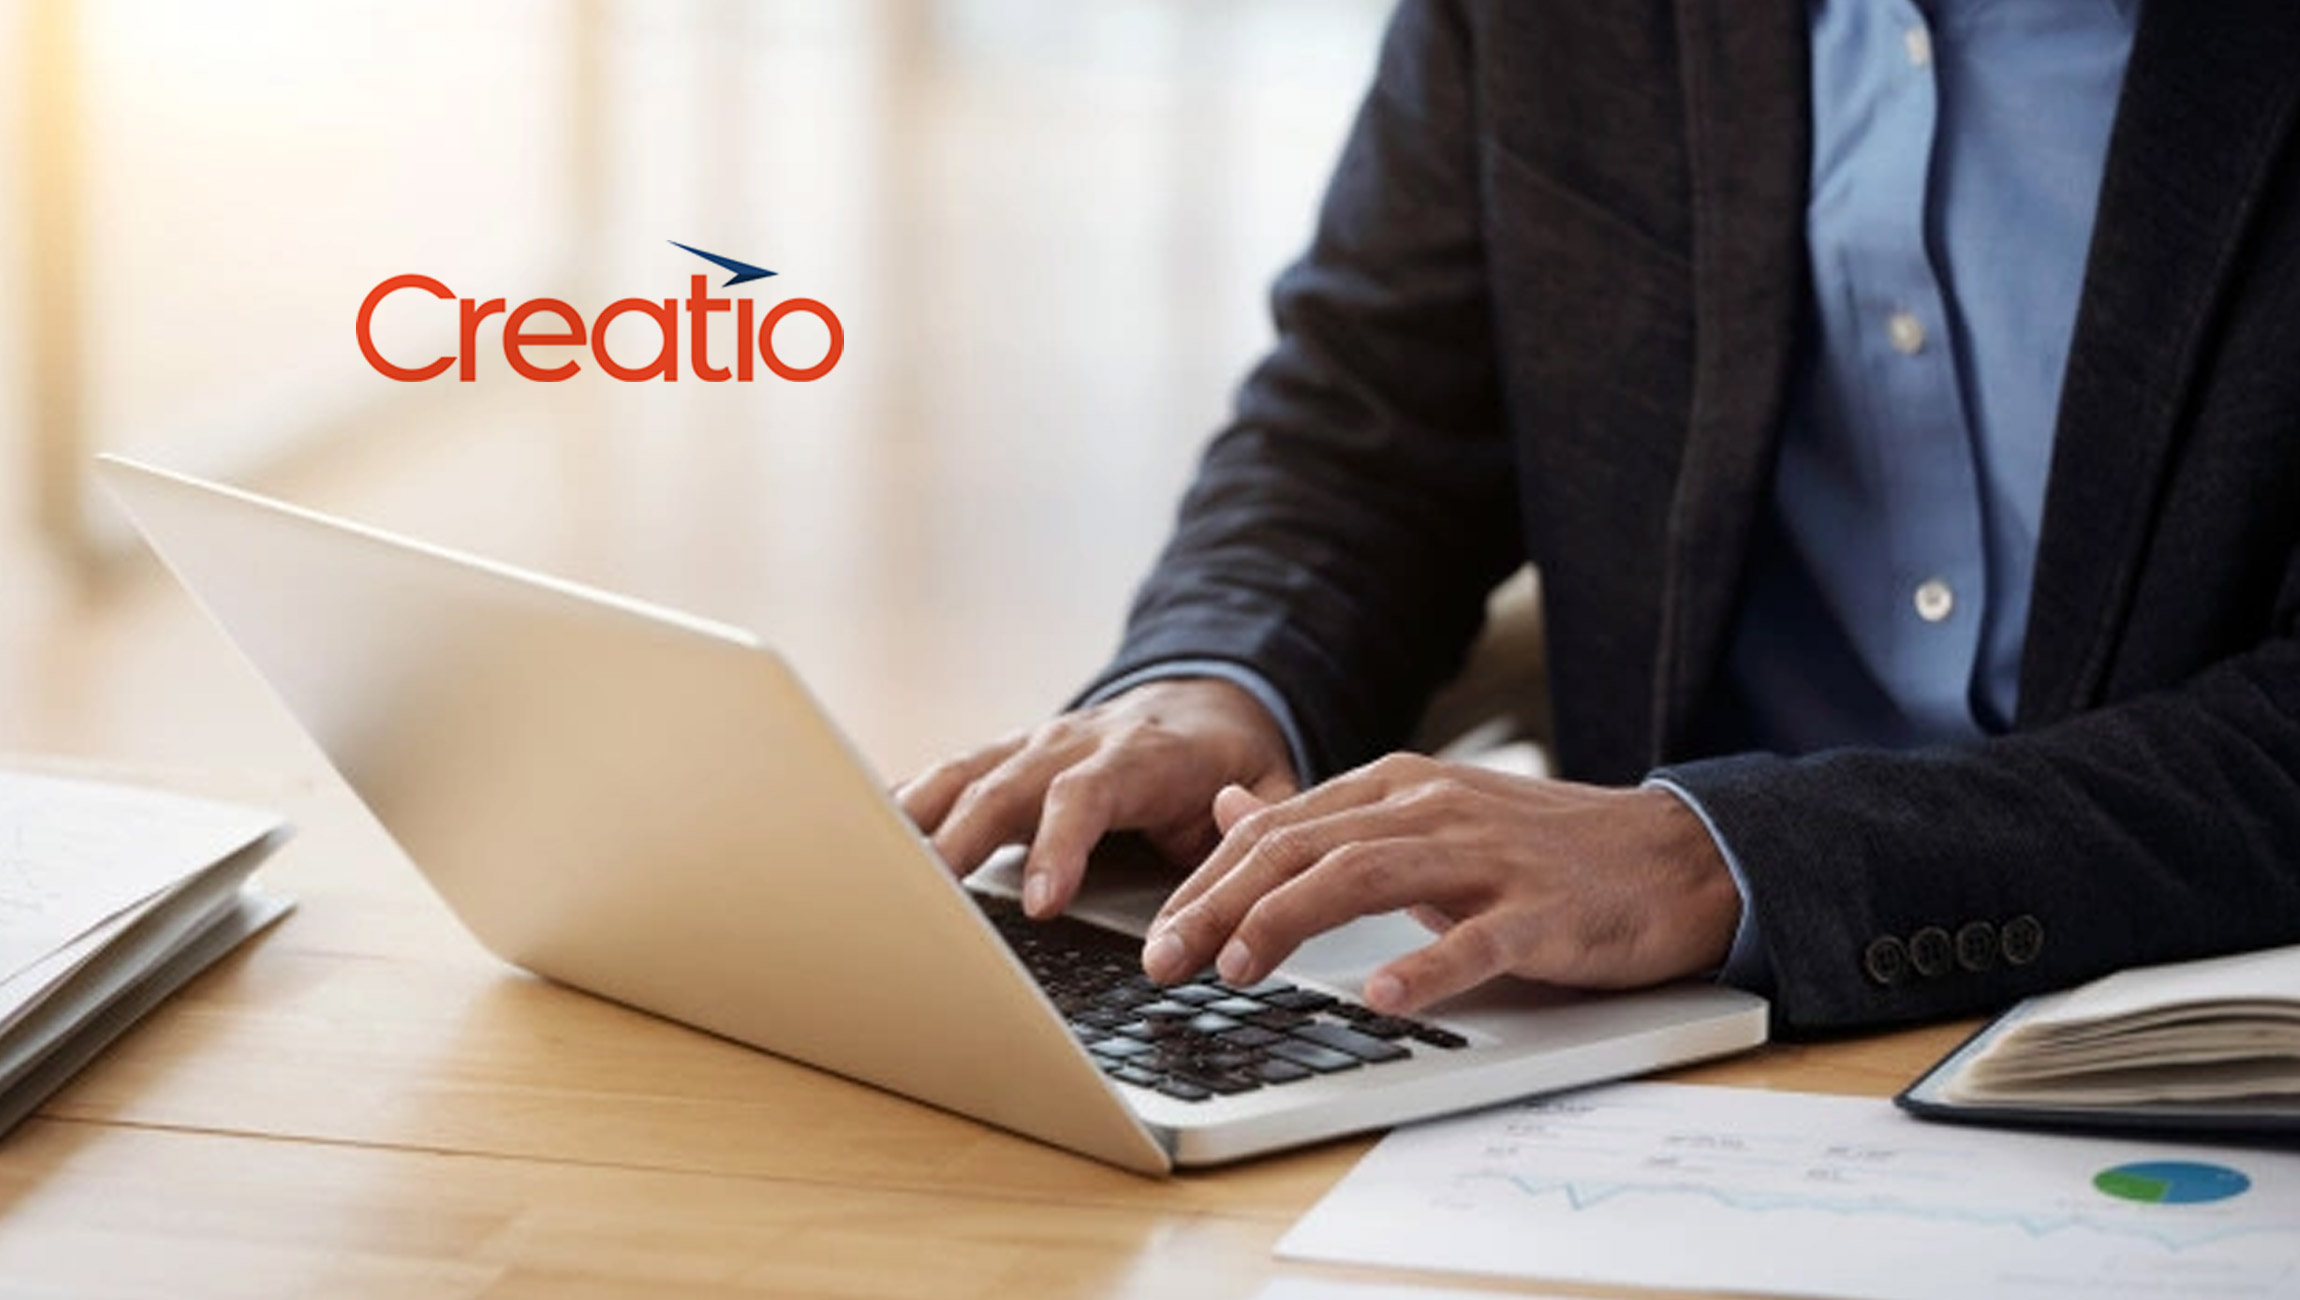 Creatio Named Market Leader in the Spring 2022 Customer Relationship Management (CRM) Software Customer Success Report